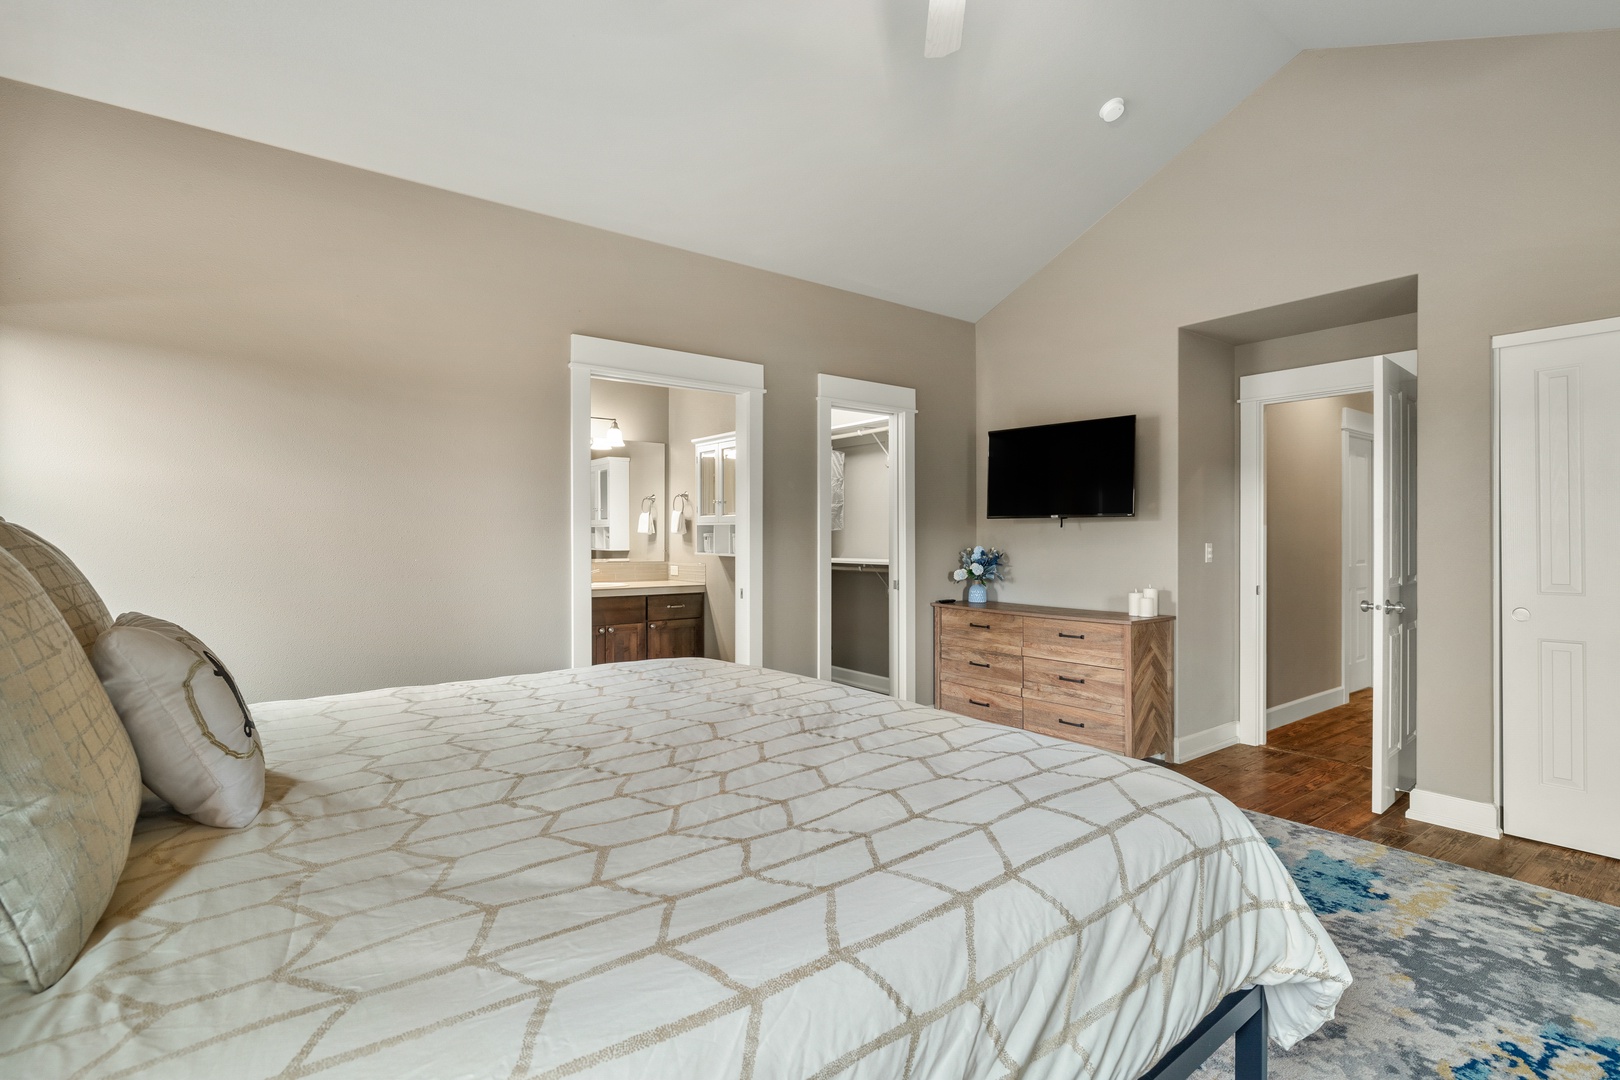 The master suite offers a king bed, private en suite, Smart TV, & patio access